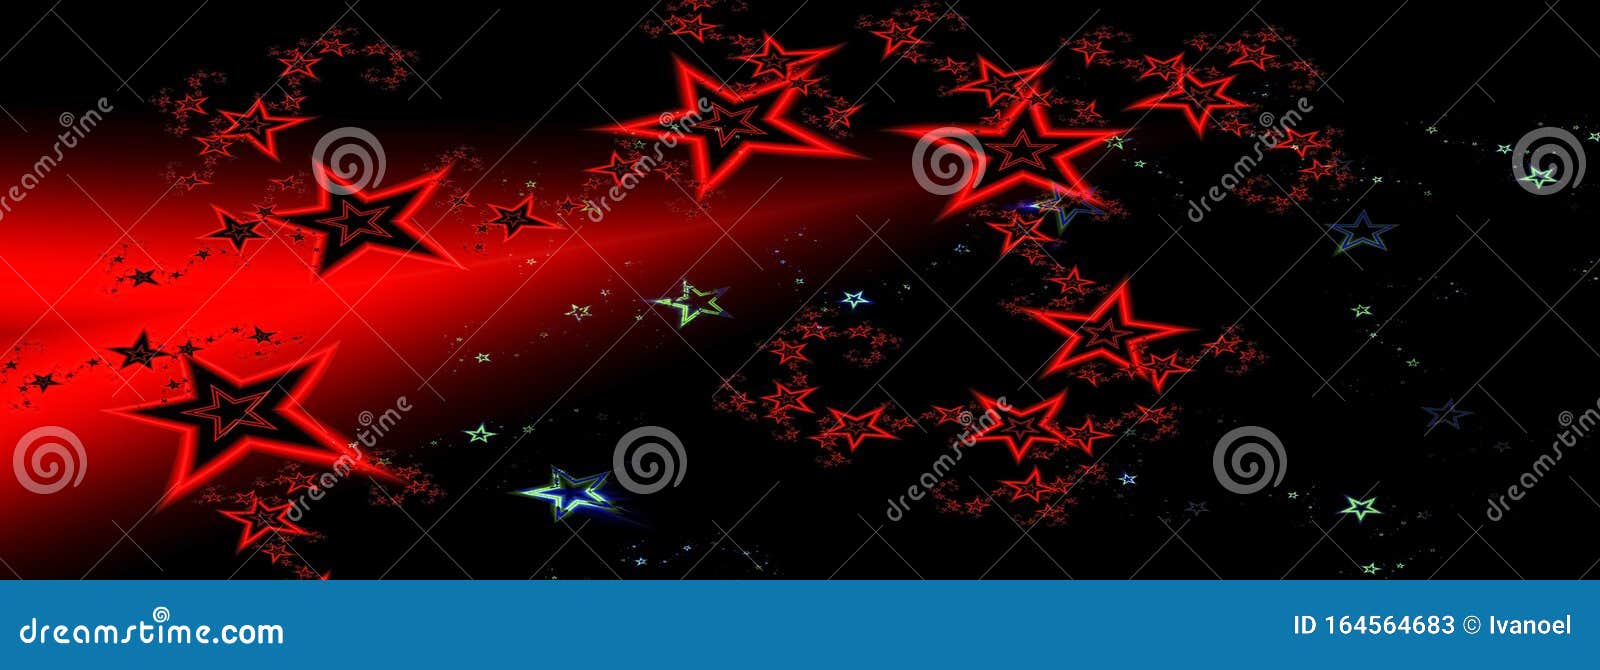 Milky Way Galaxy. Stream of Red and Black Stars Fractal Widescreen ...